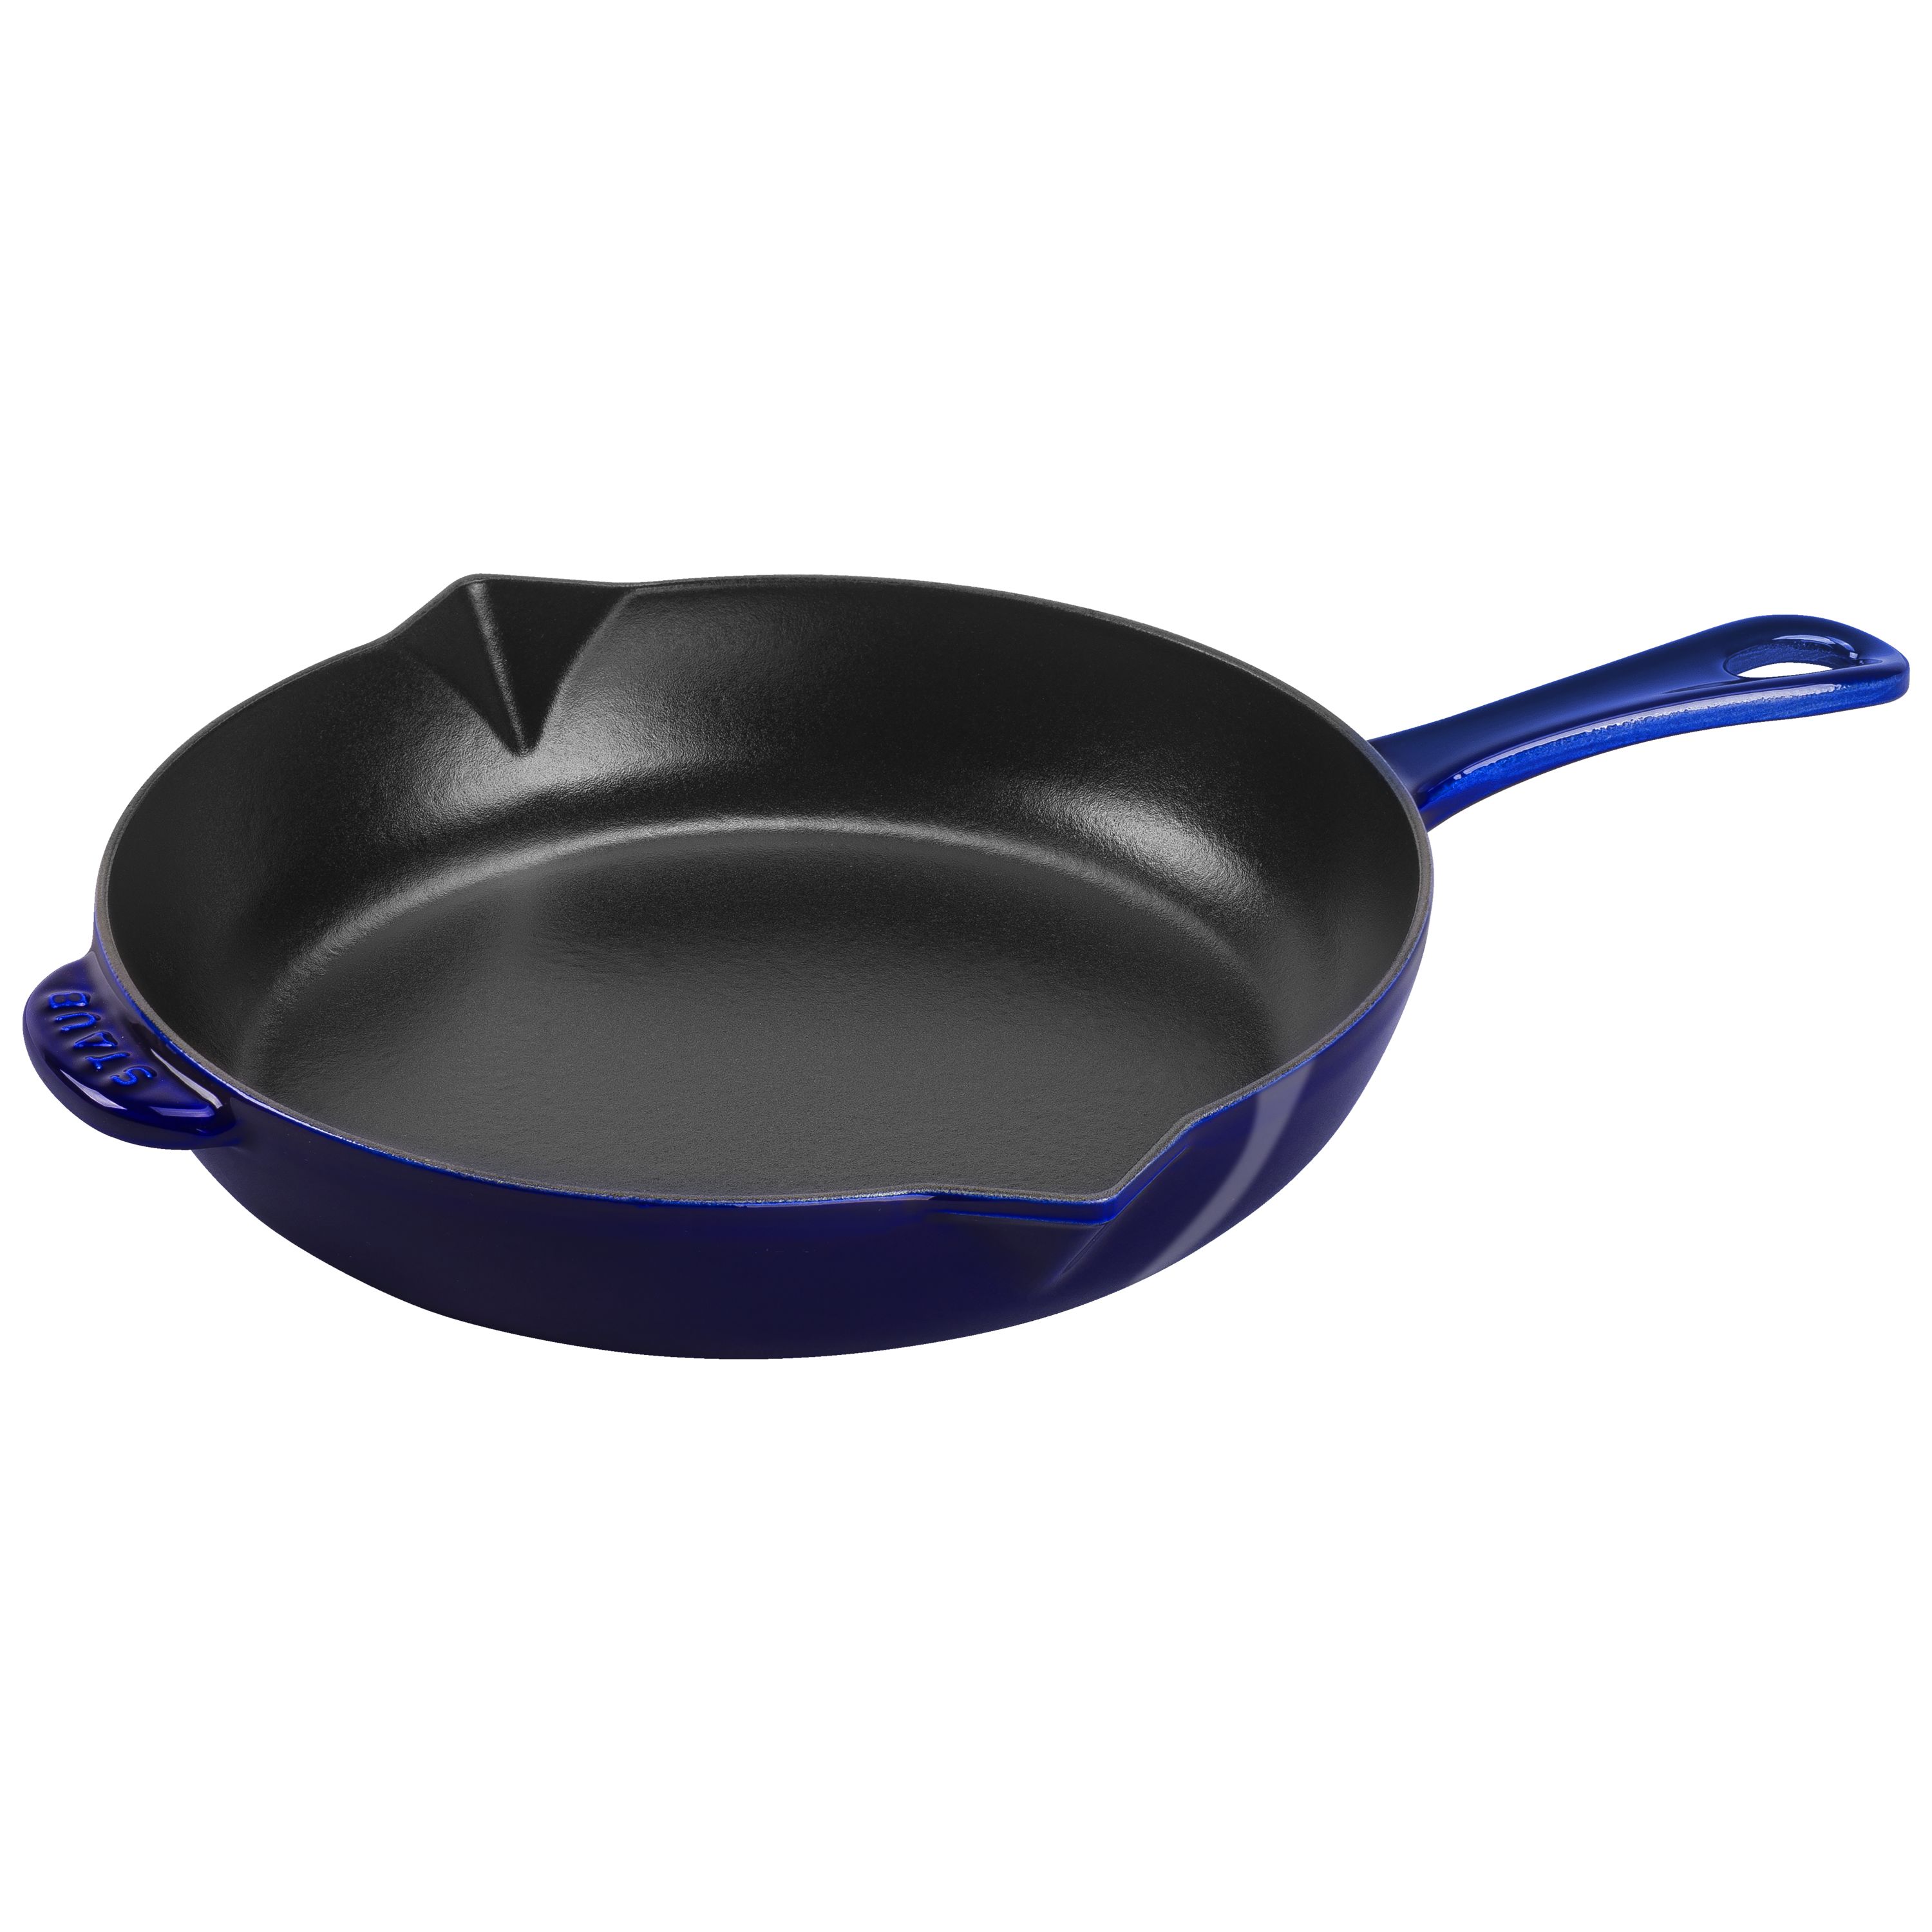 Made In Cookware - 2 Piece (Includes 10,12) Seasoned Blue Carbon Steel  Frying Pan - (Like Cast Iron, but Better) - Professional Cookware Sweden 